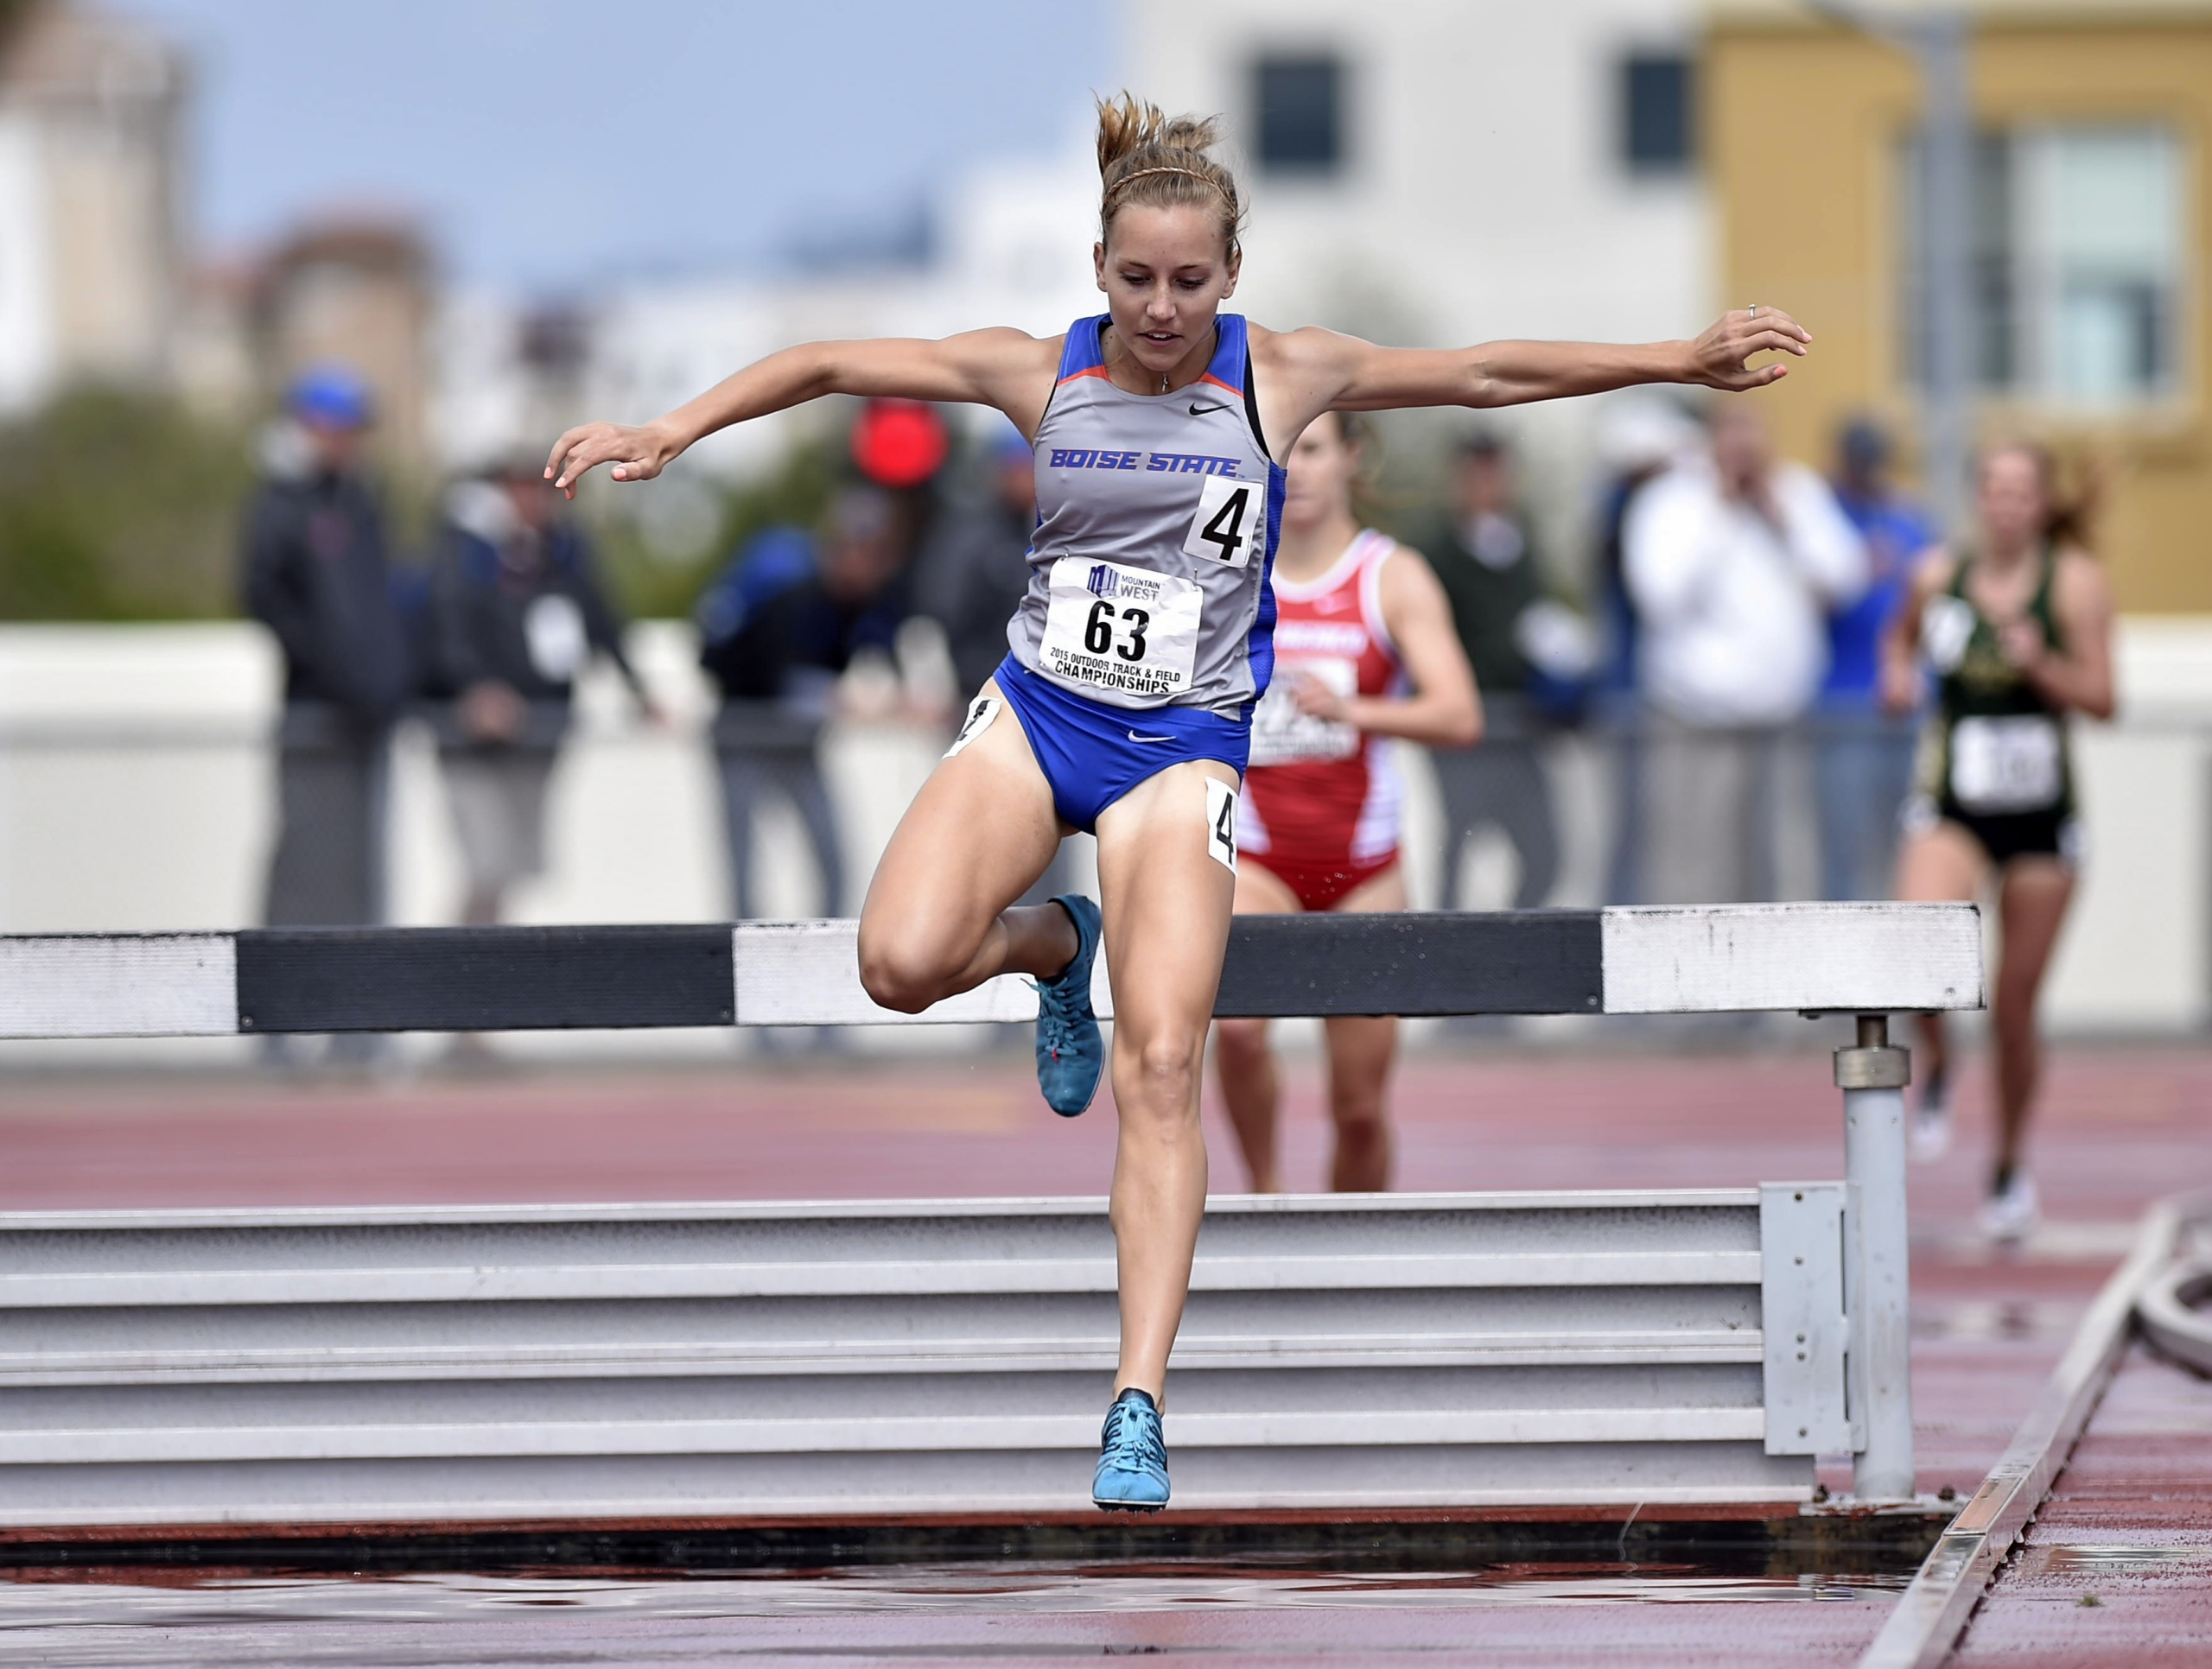 BOISE STATE & THE OLYMPICS: MARISA HOWARD HEADING TO PARIS ON SUNDAY TO CHASE GOLD